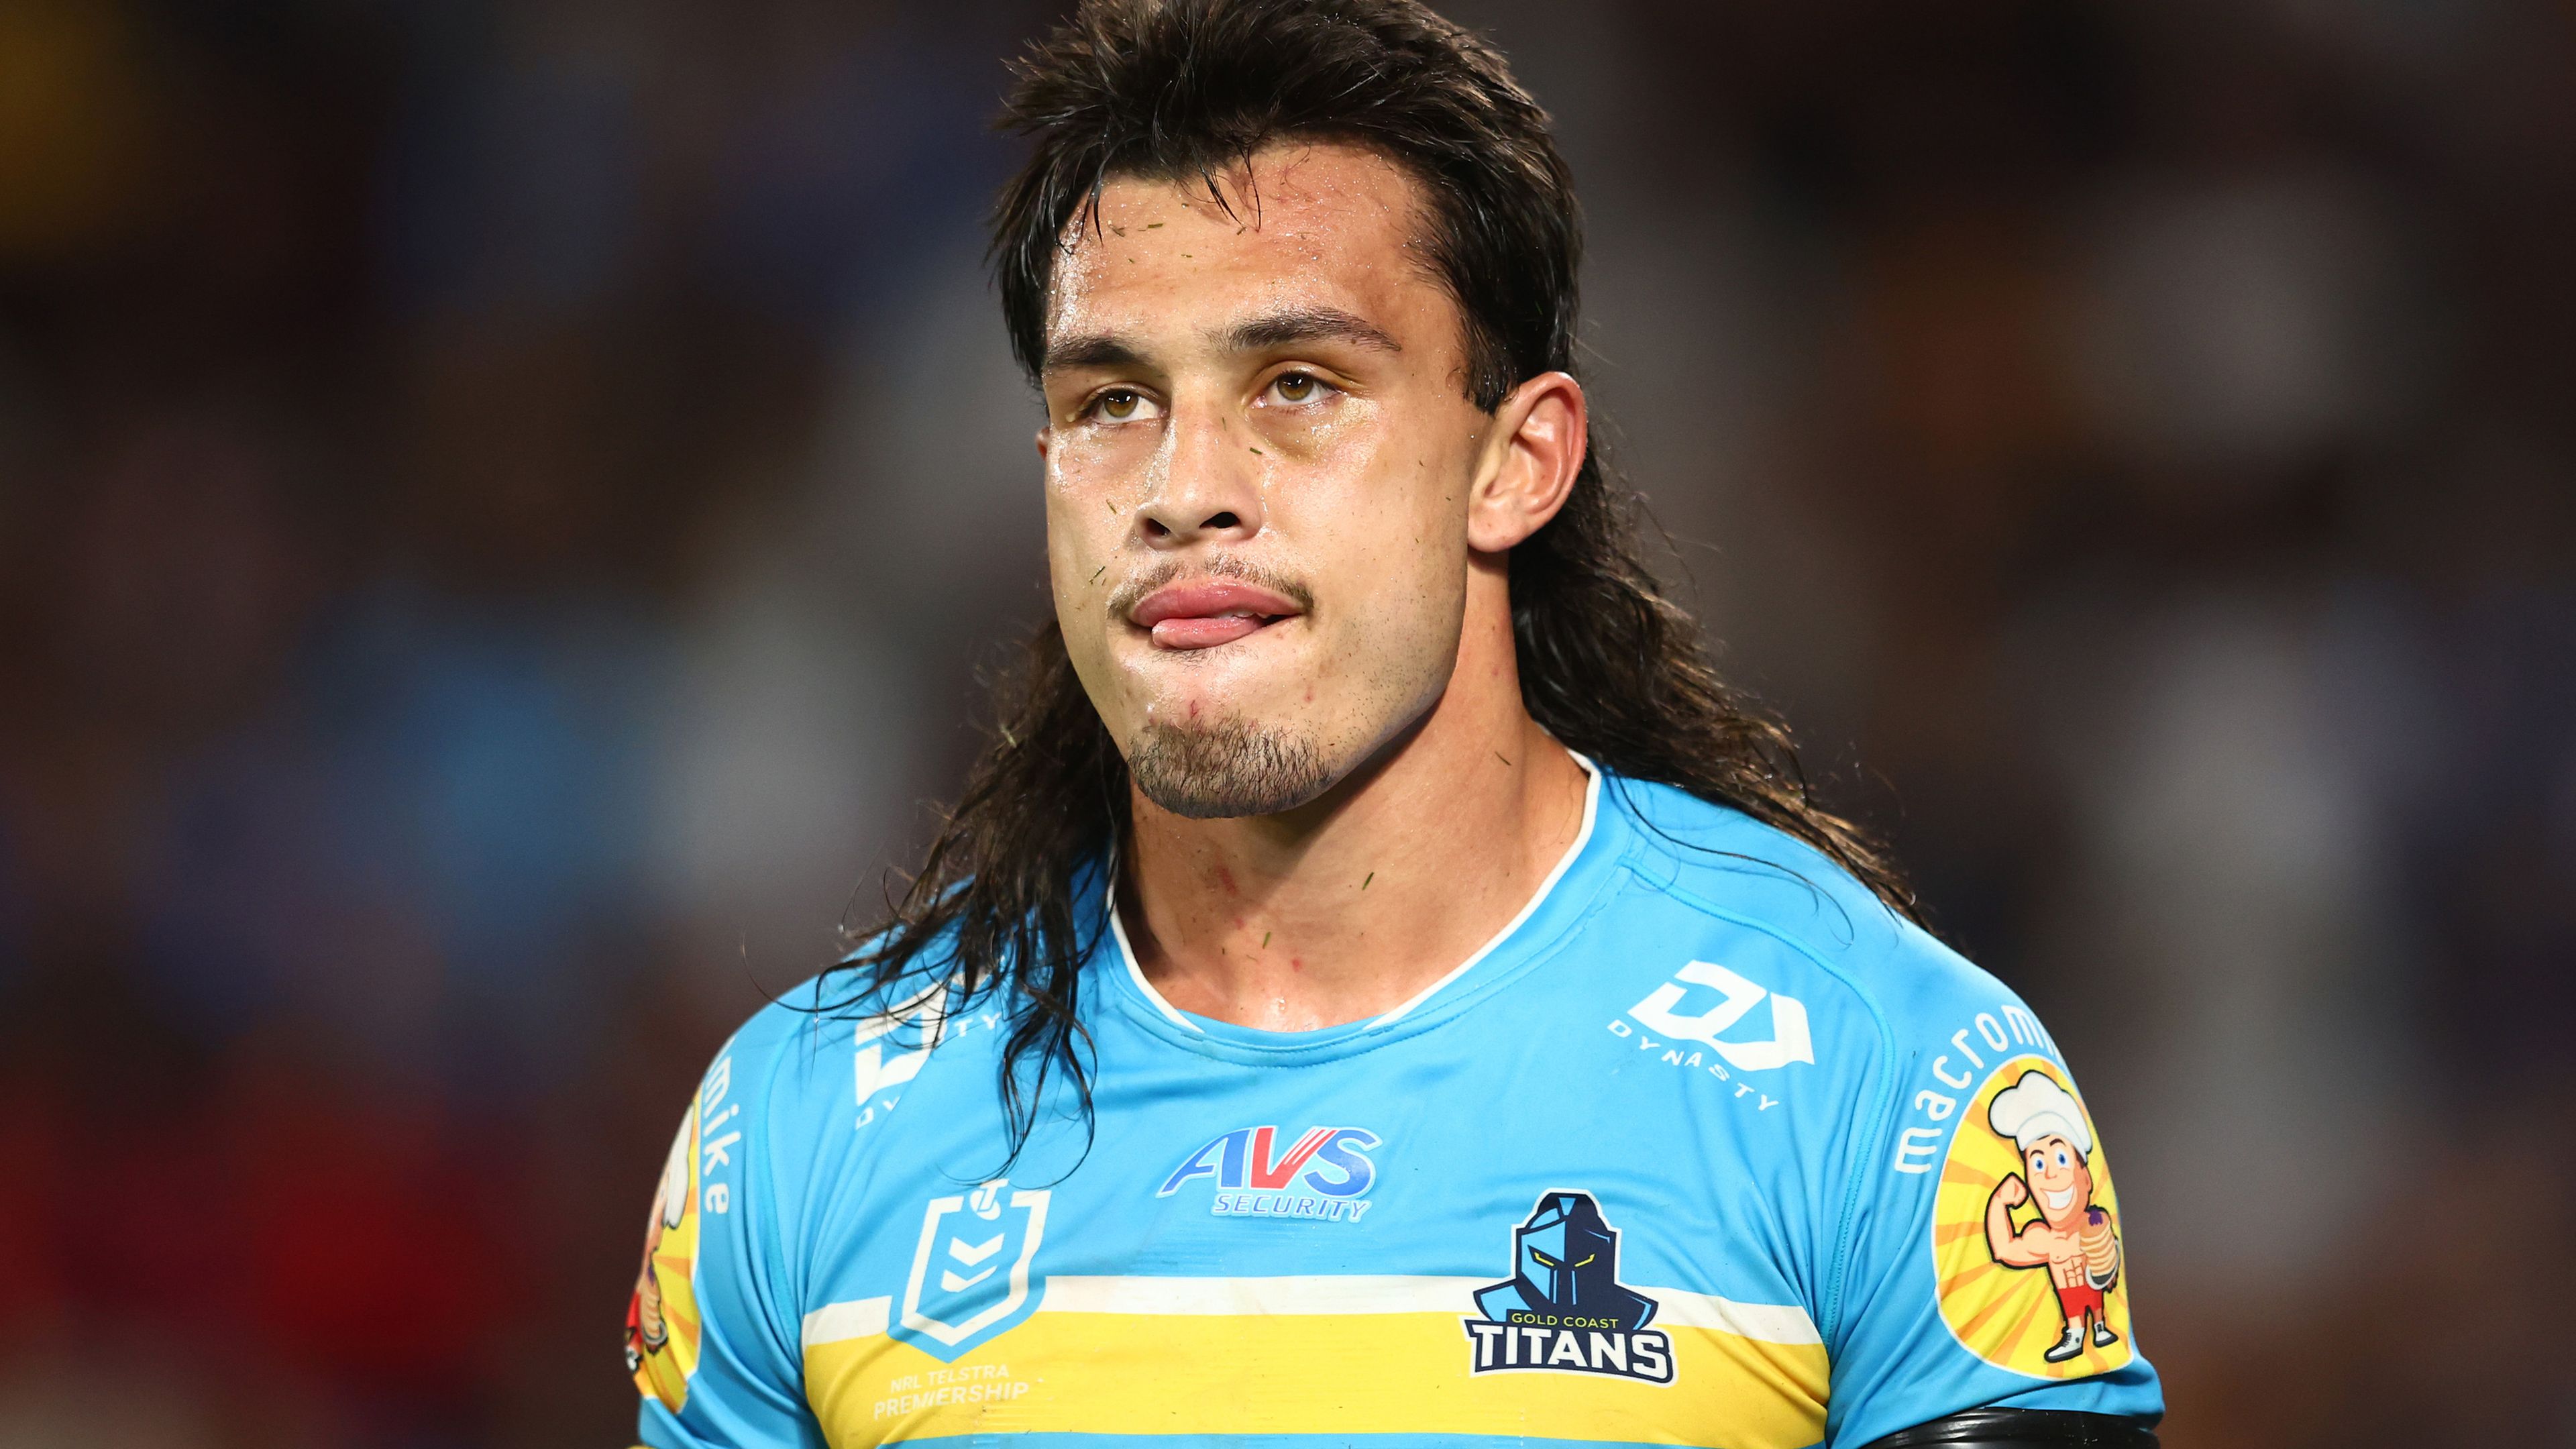 EXCLUSIVE: Tino Fa'asuamaleaui 'owes the Titans', says Darren Lockyer as potential exit looms